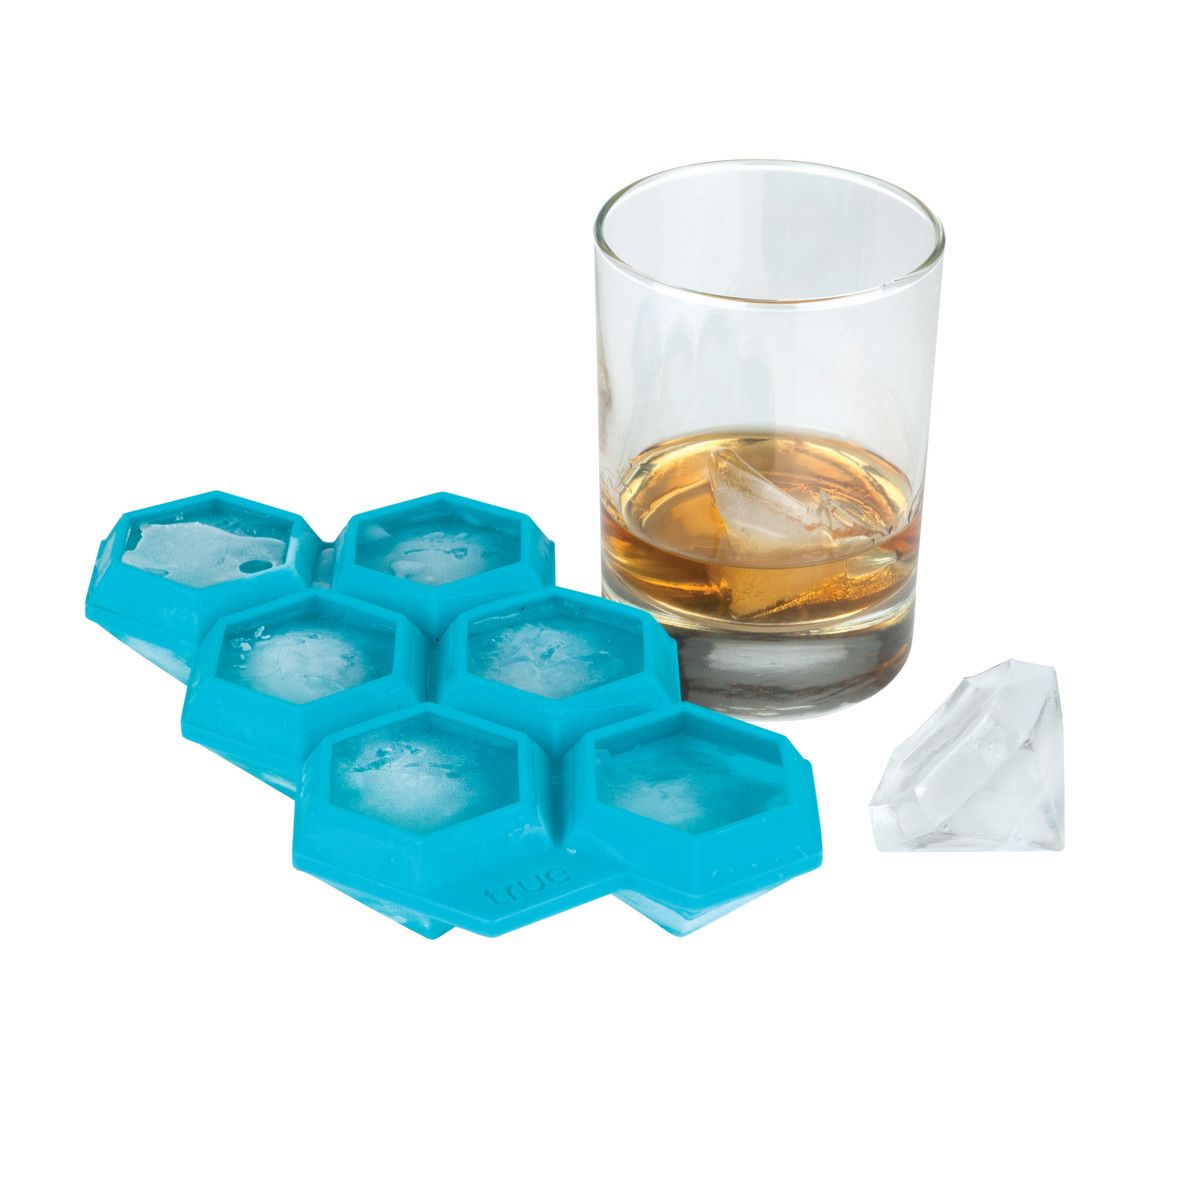 True Zoo Diamond Silicone Mold and Ice Cube Tray for Whiskey, Bath Bombs,  Candy, Soap, and DIY Crafts, Dishwasher Safe, 1.75, Blue, Set of 1, Makes  6 Ice Cubes